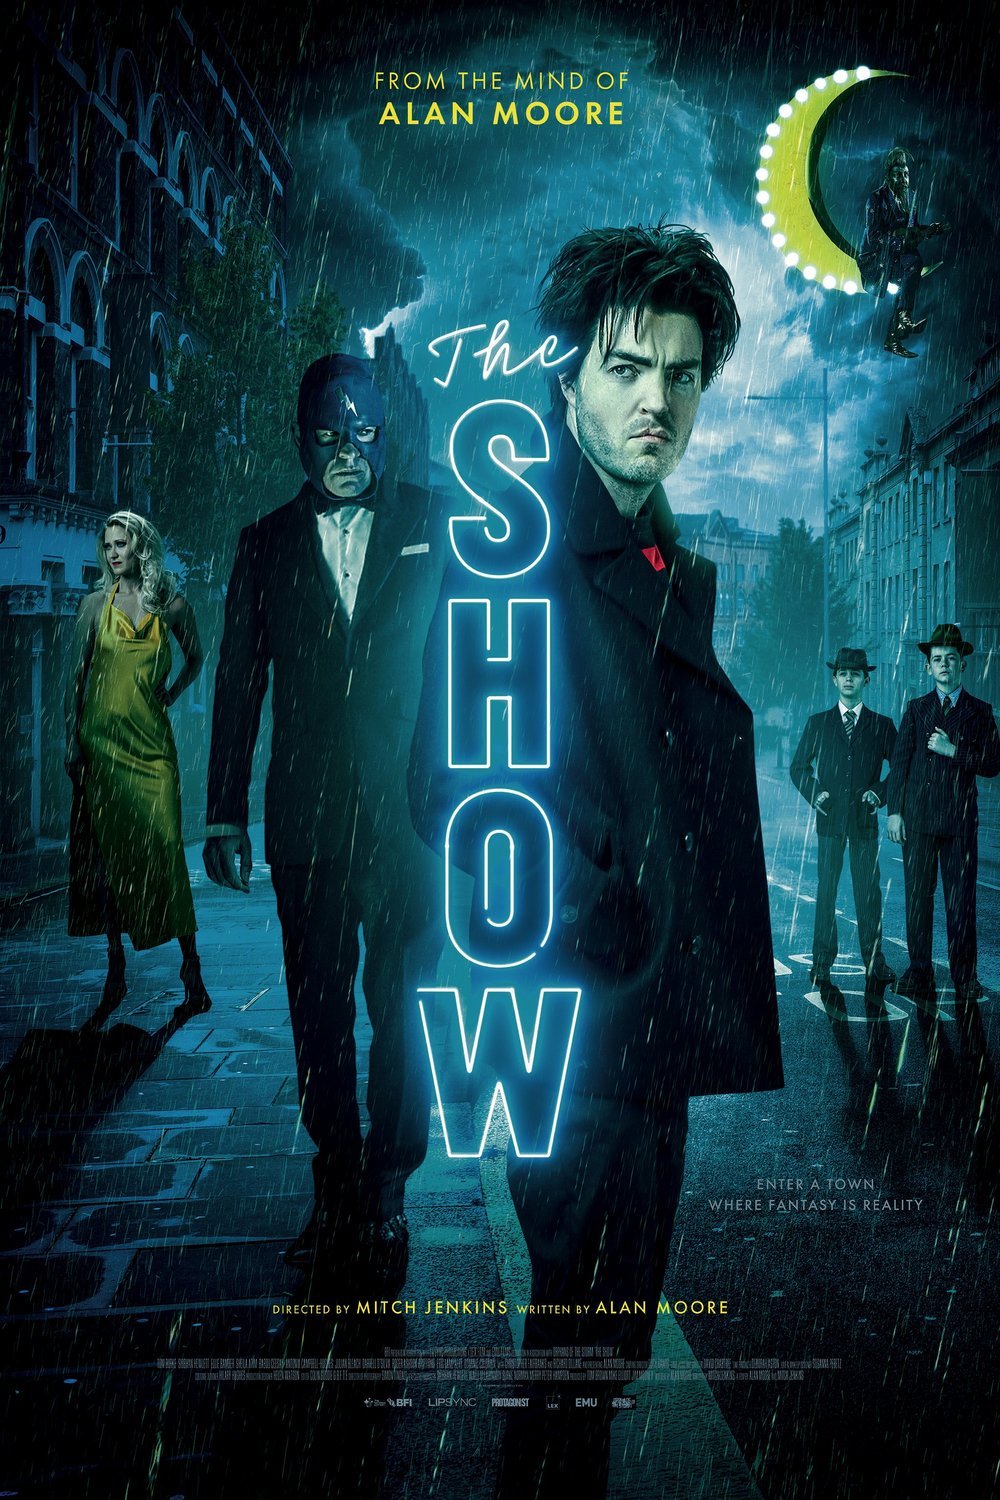 Poster of the movie The Show